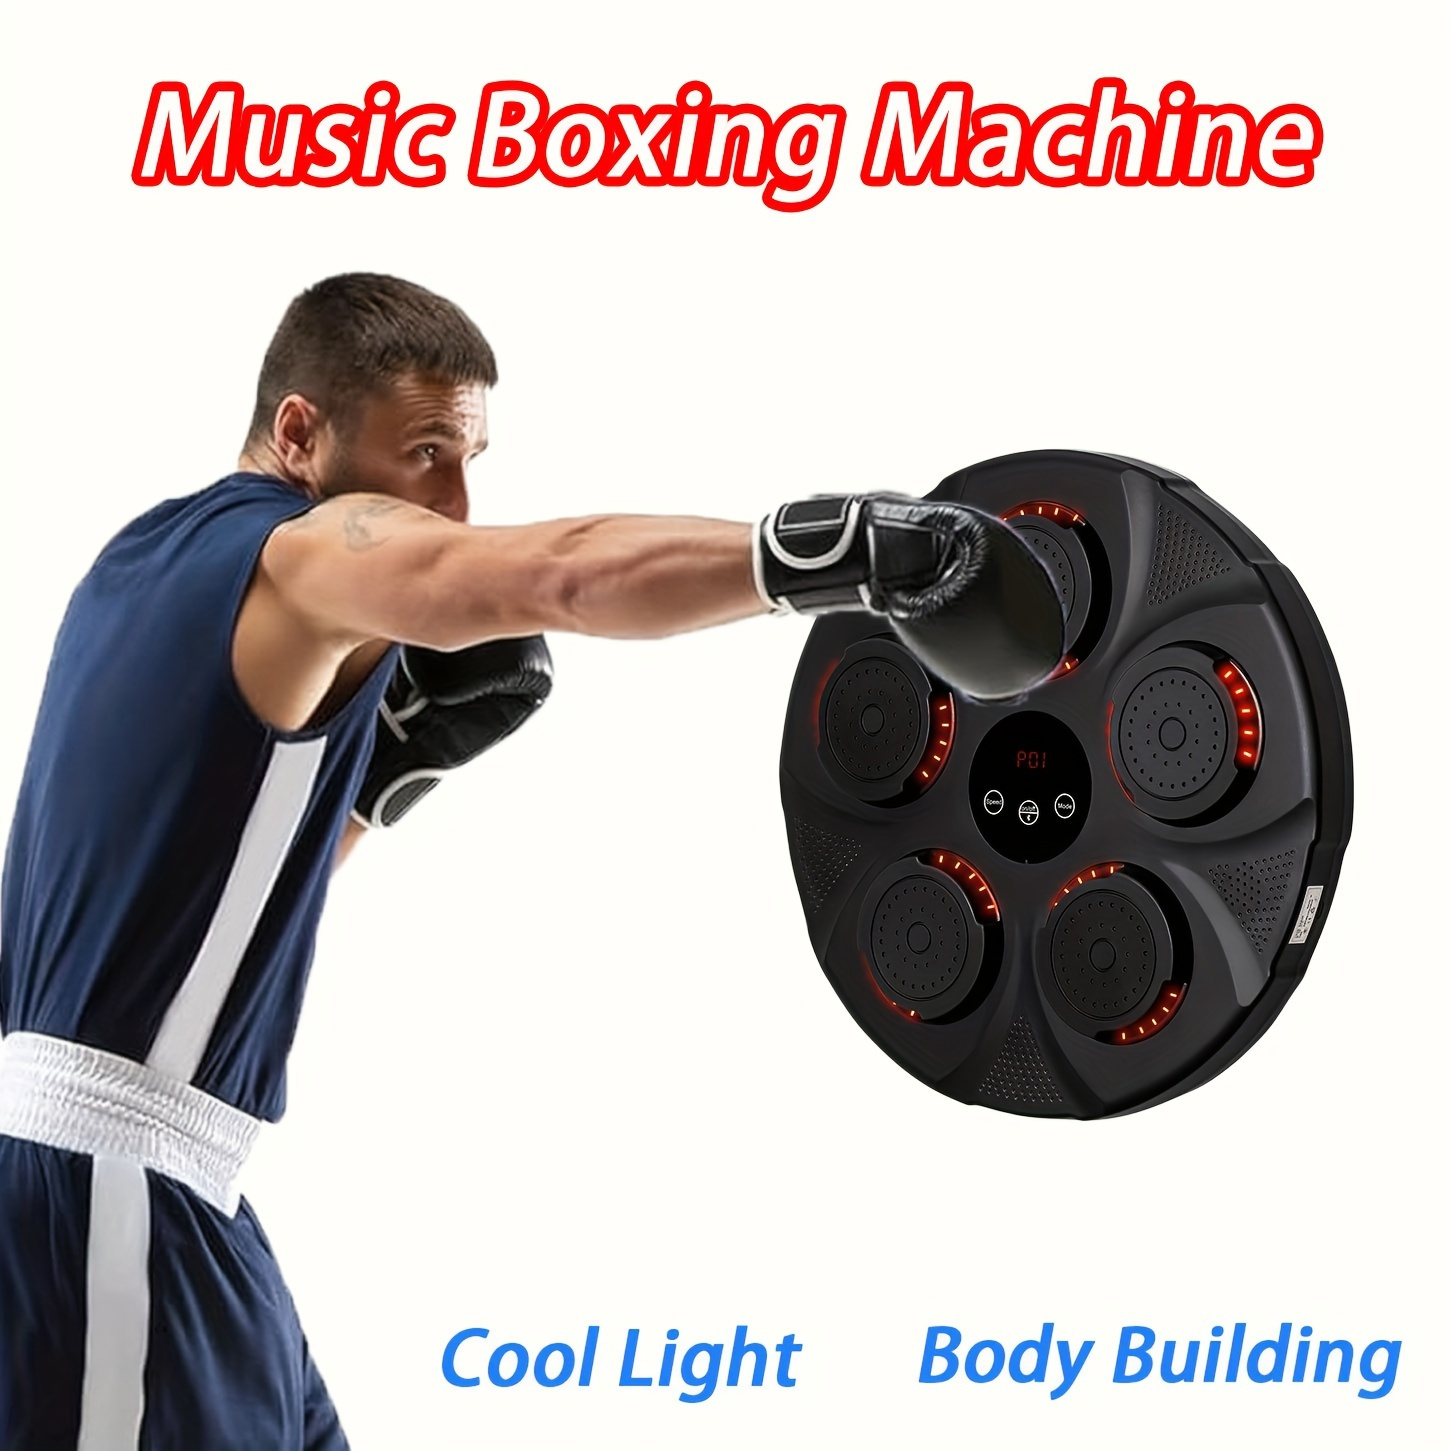 One-Punch™ Smart Music Boxing Machine Review By Createsomes, by  Createsomes